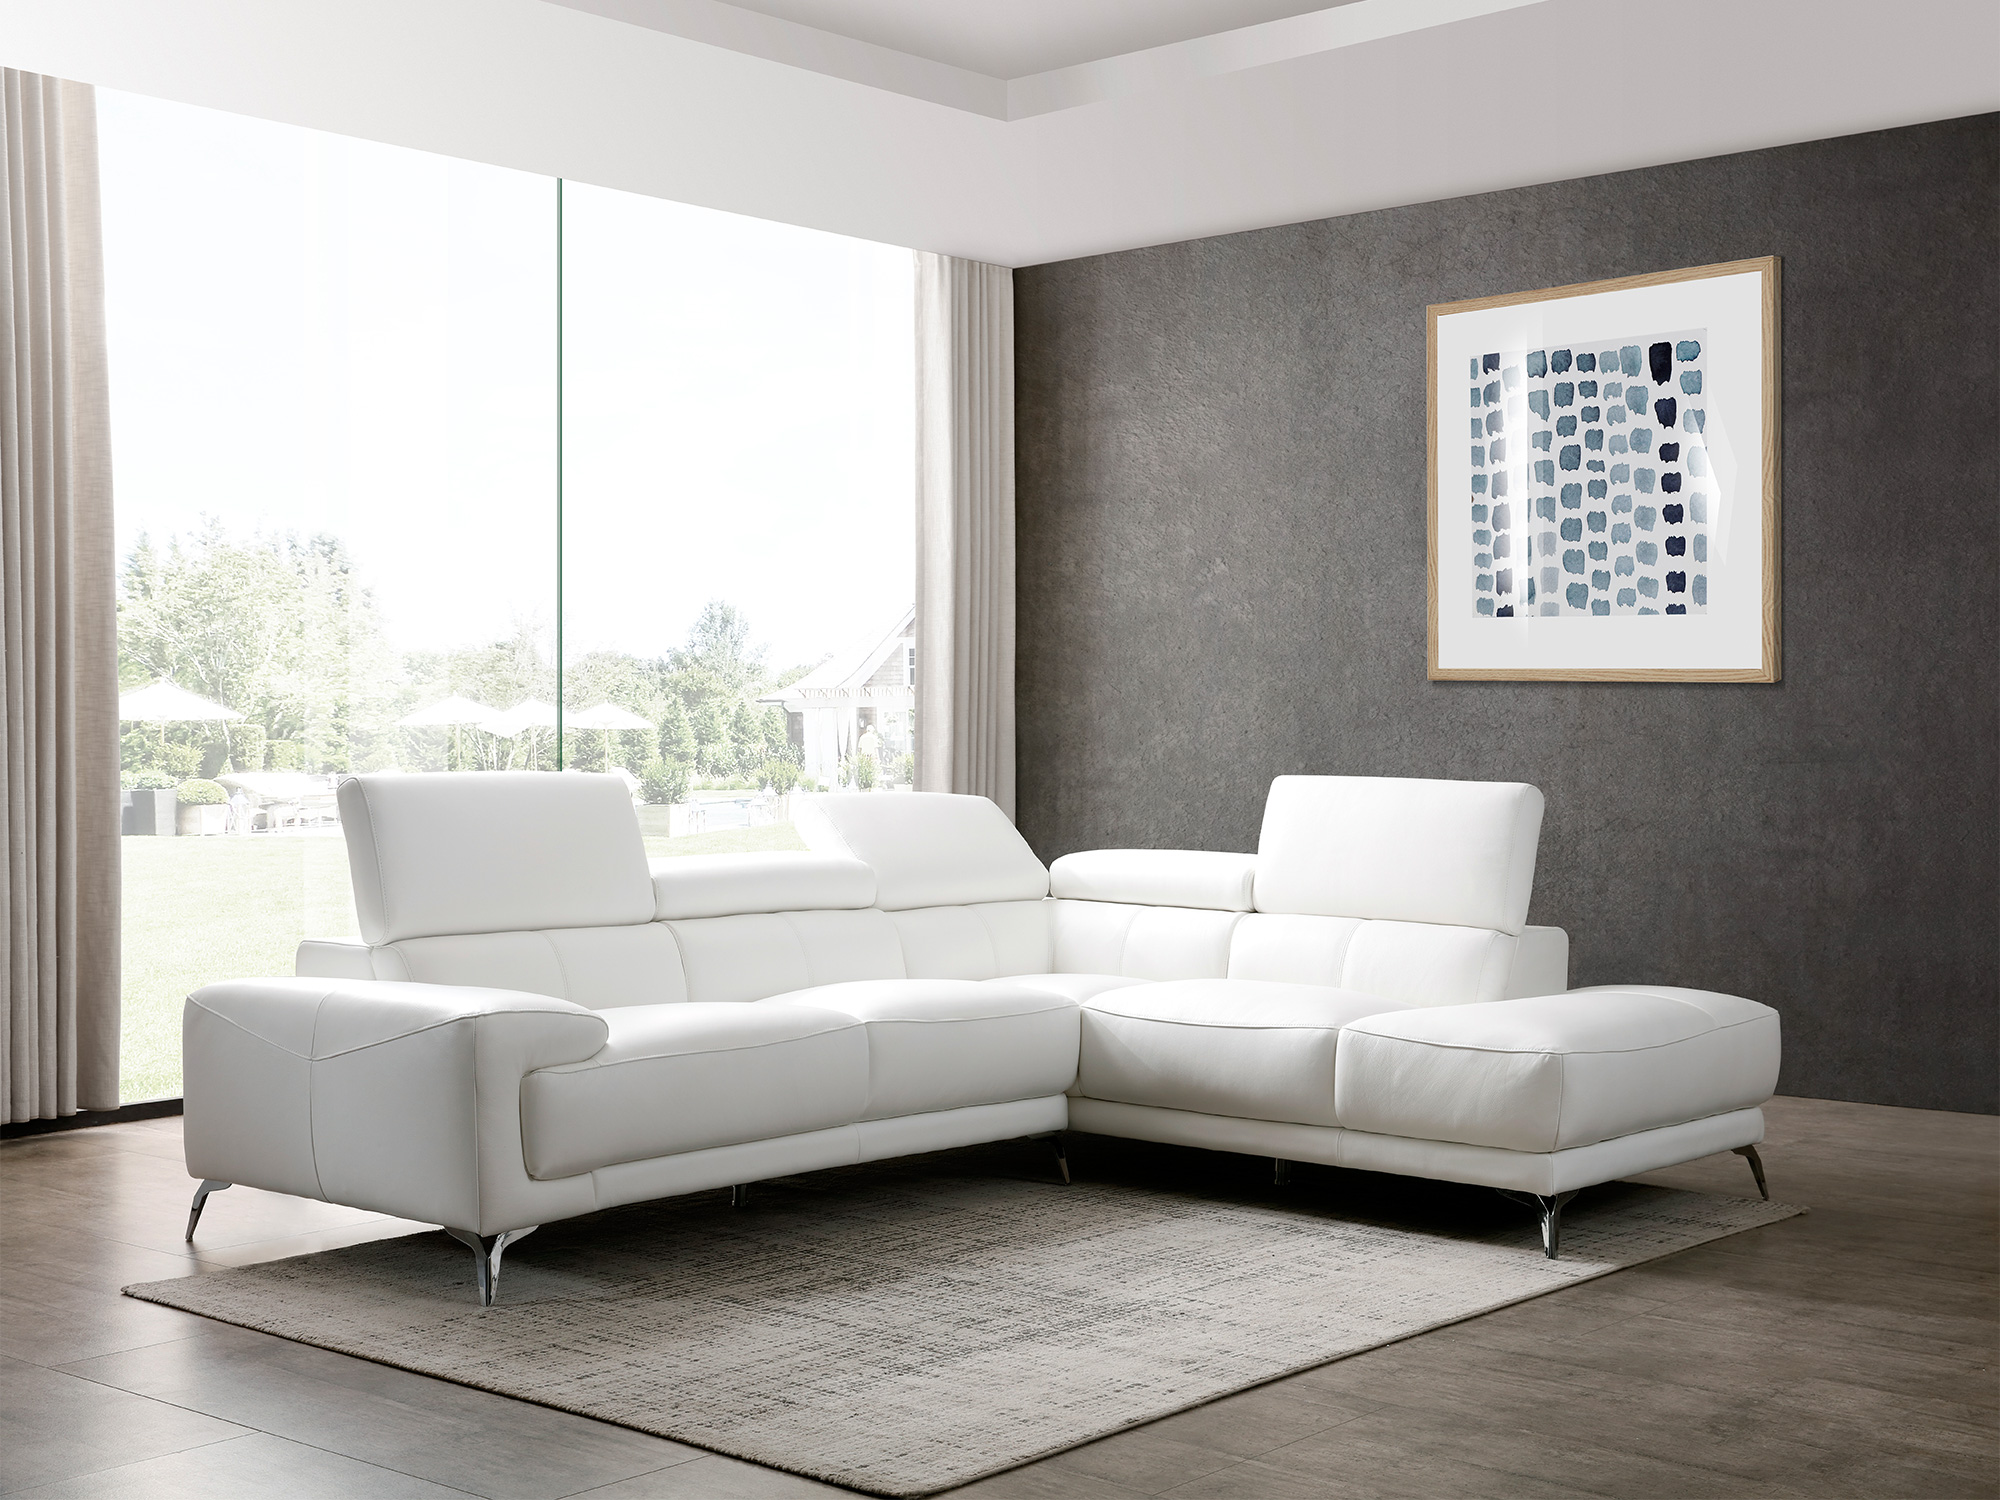 Fabiola Sectional Whiteline Modern Living, White Leather Contemporary Sectional